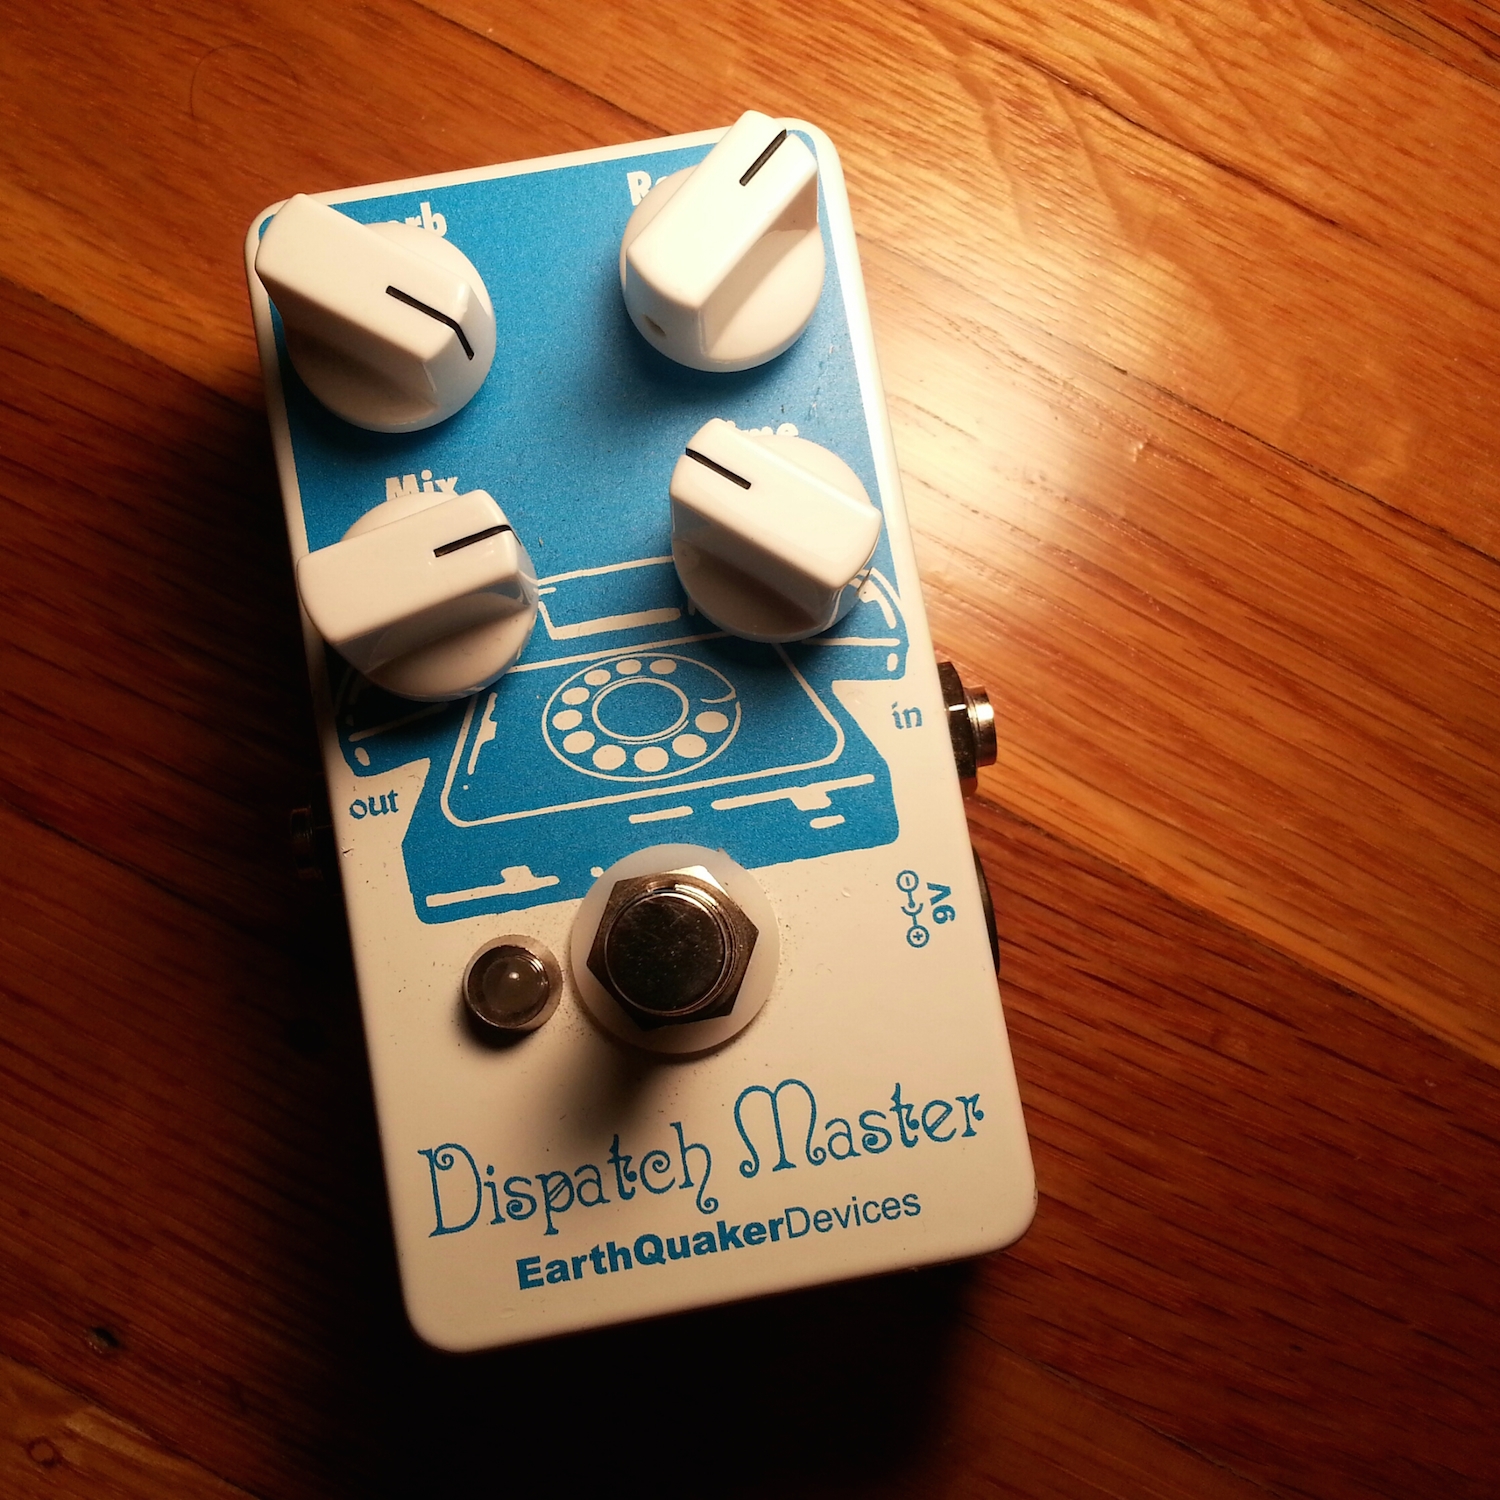 Earth Quaker Devices Dispatch Master